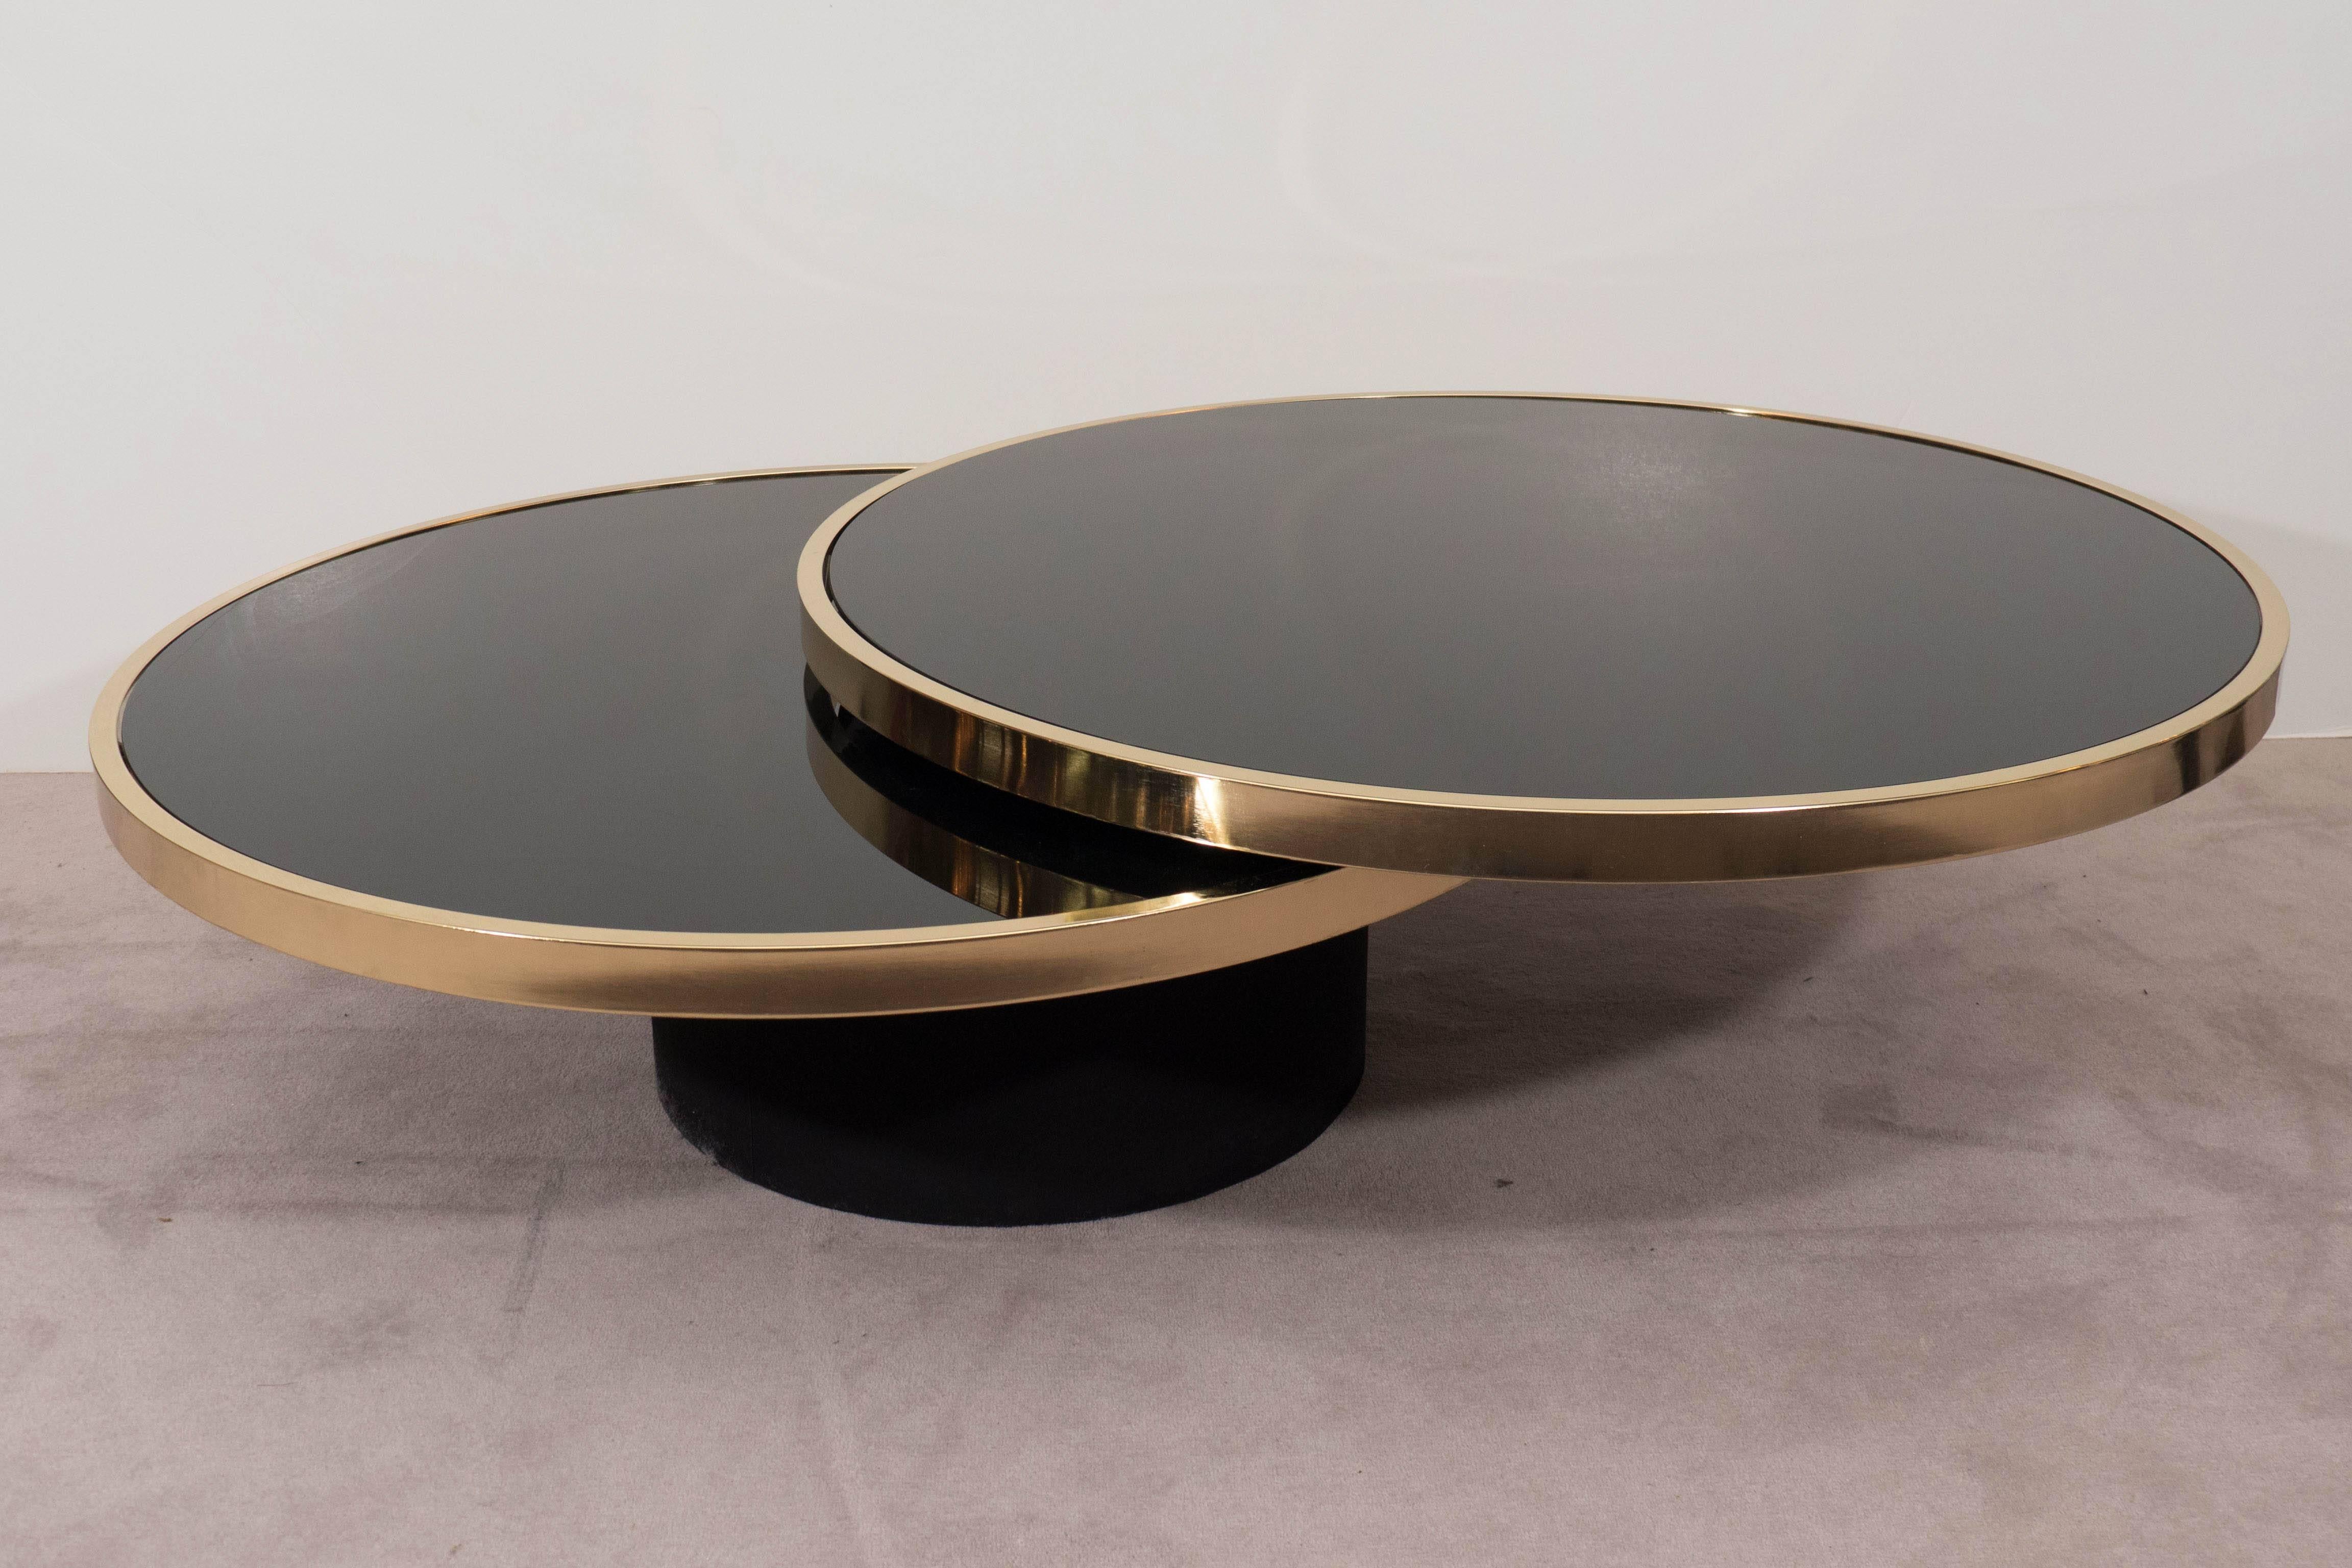 A vintage two-tier cocktail table, produced circa 1970s by the Design Institute of America (DIA), with gleaming black glass tops, in round brass frames, on a black cylindrical base, which enables the top tier to swing outwards. Fully extended the